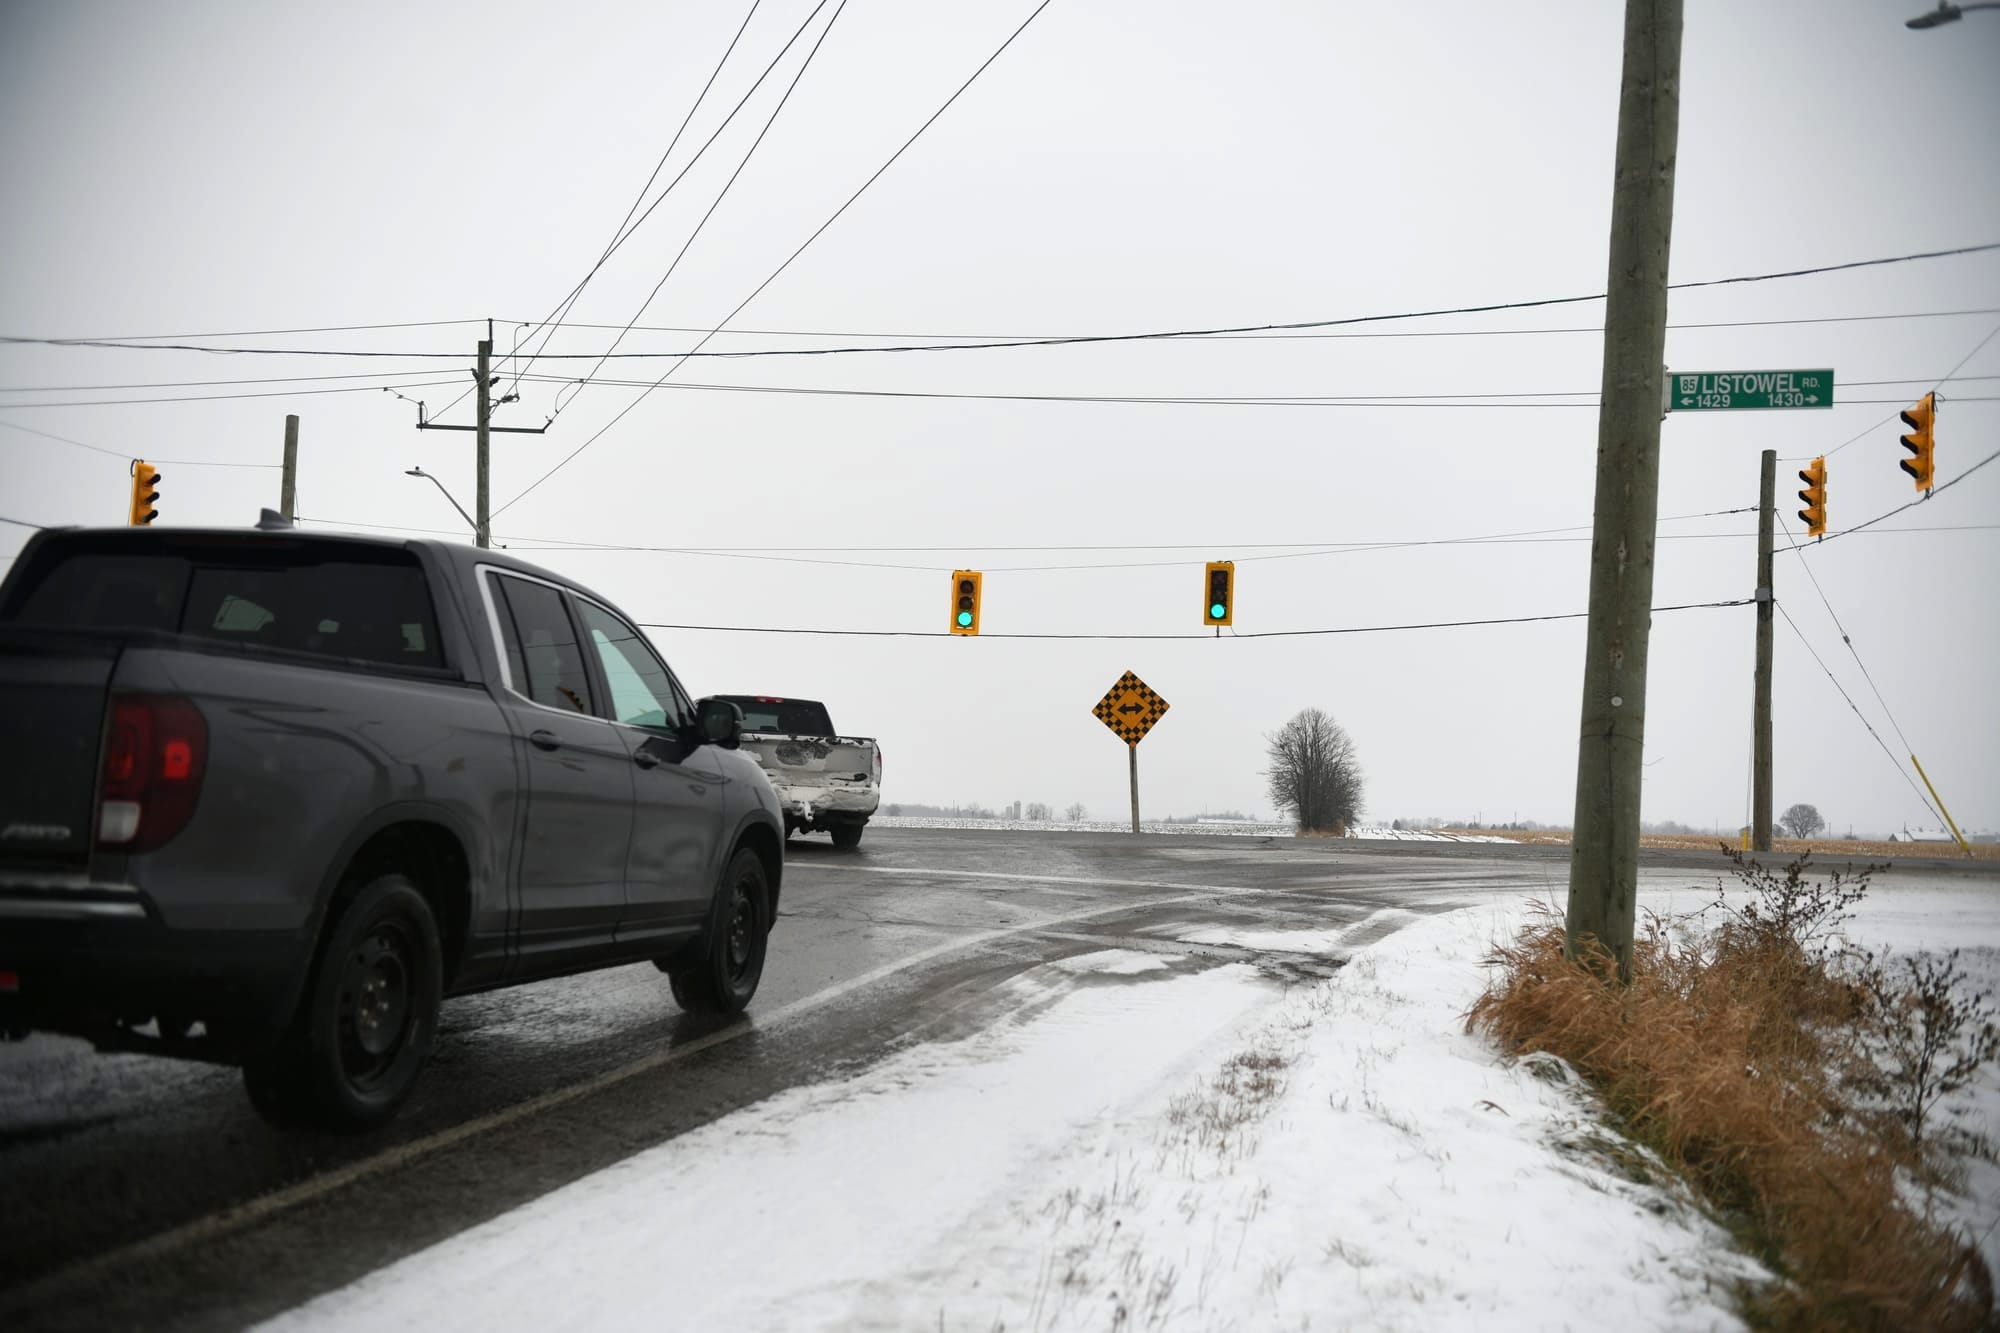 Region activates two new traffic signals on Listowel Road